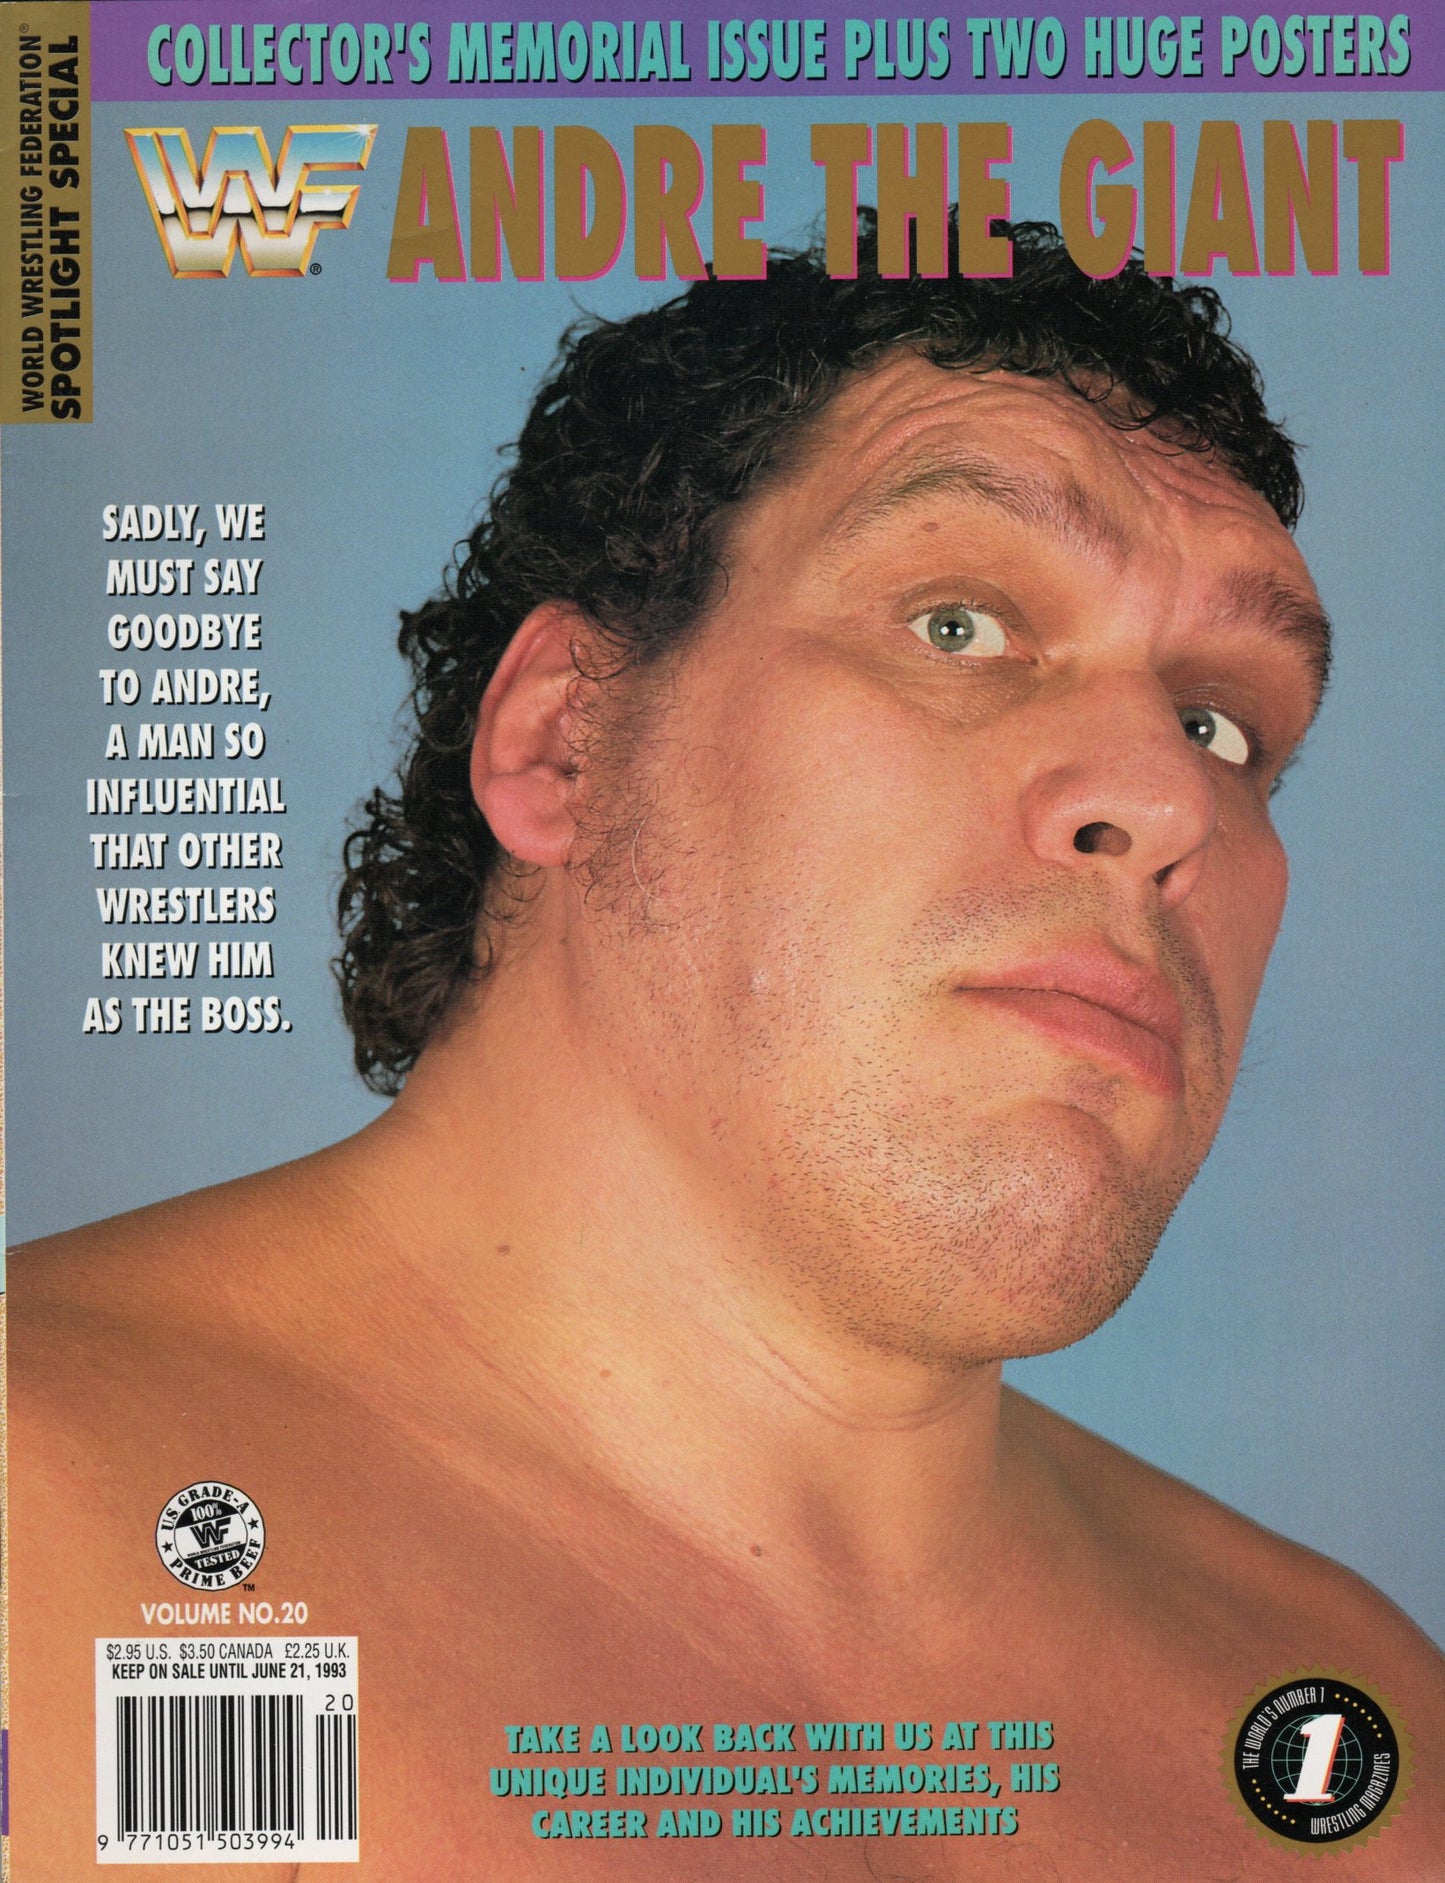 WWF Magazine Andre The Giant Collector's Memorial Issue